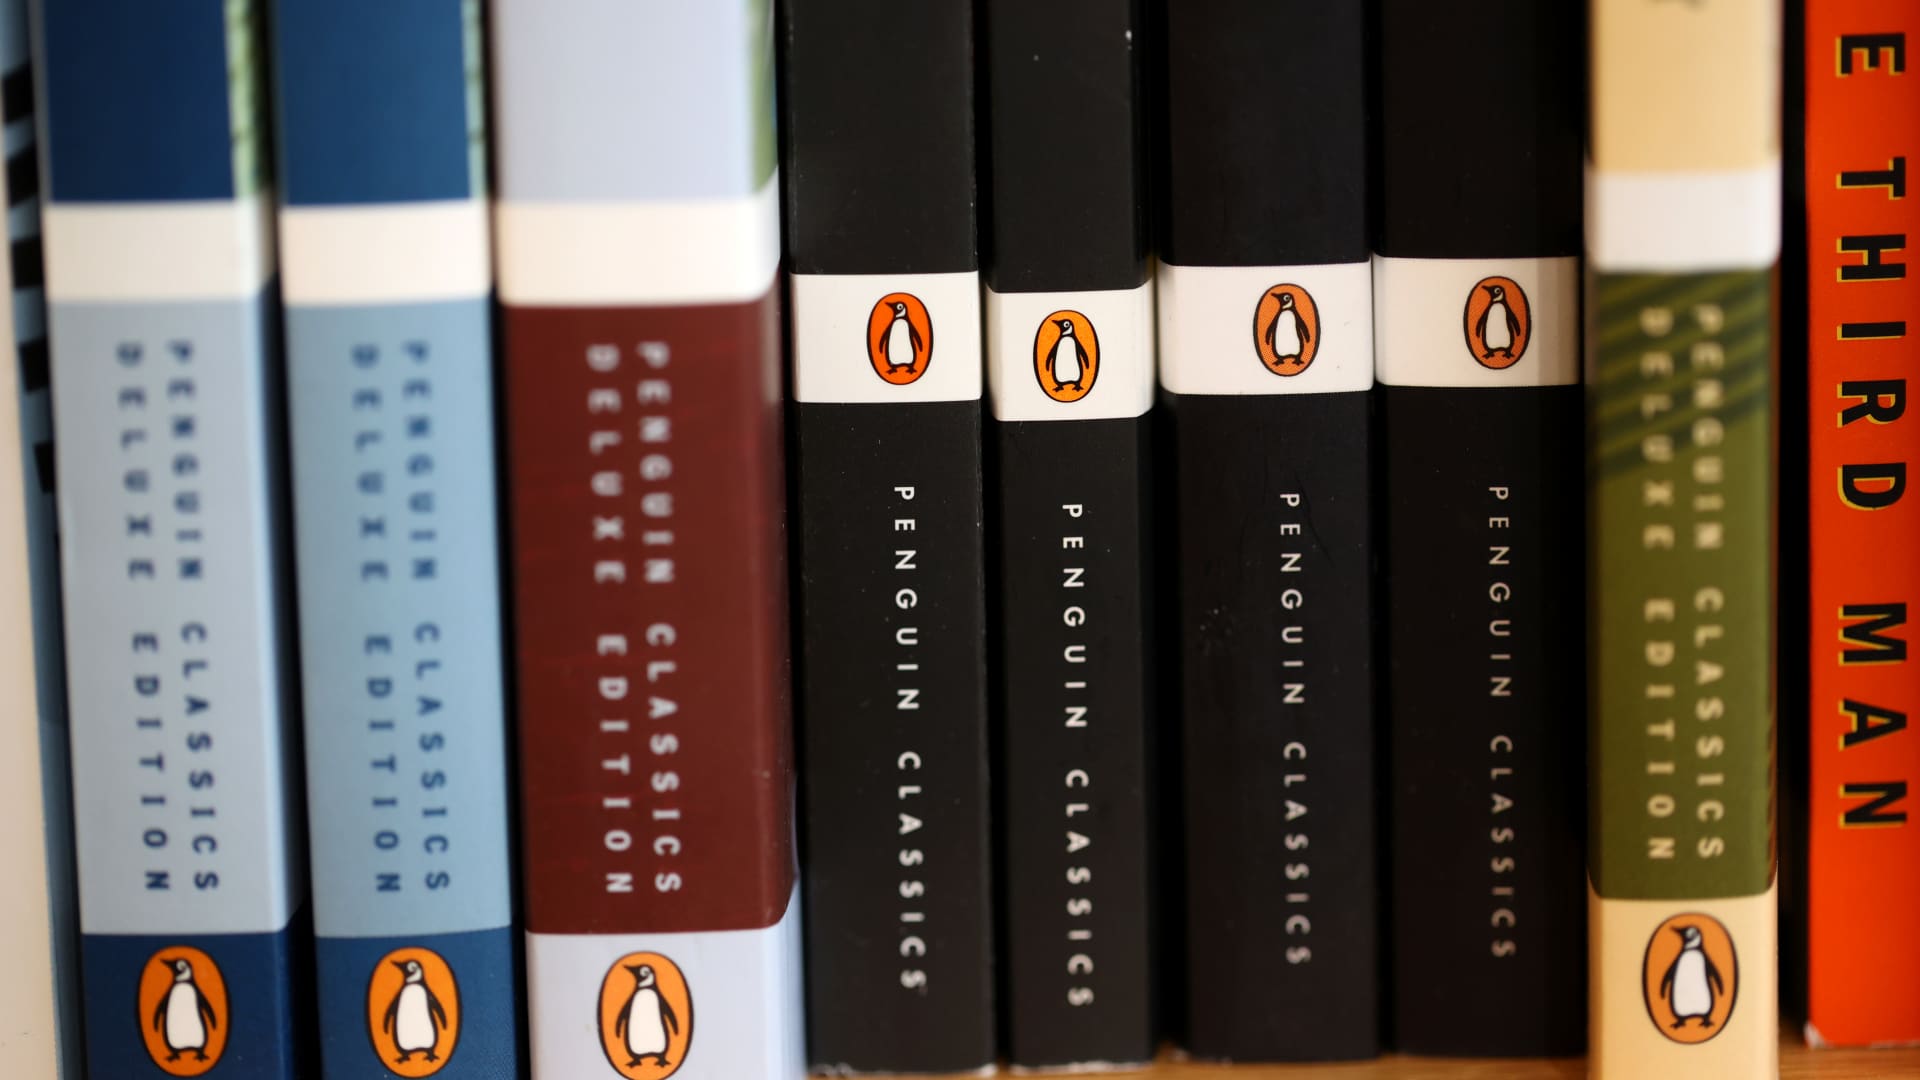 Paramount scraps deal to sell Simon & Schuster to Penguin weeks after judge rejected merger – CNBC